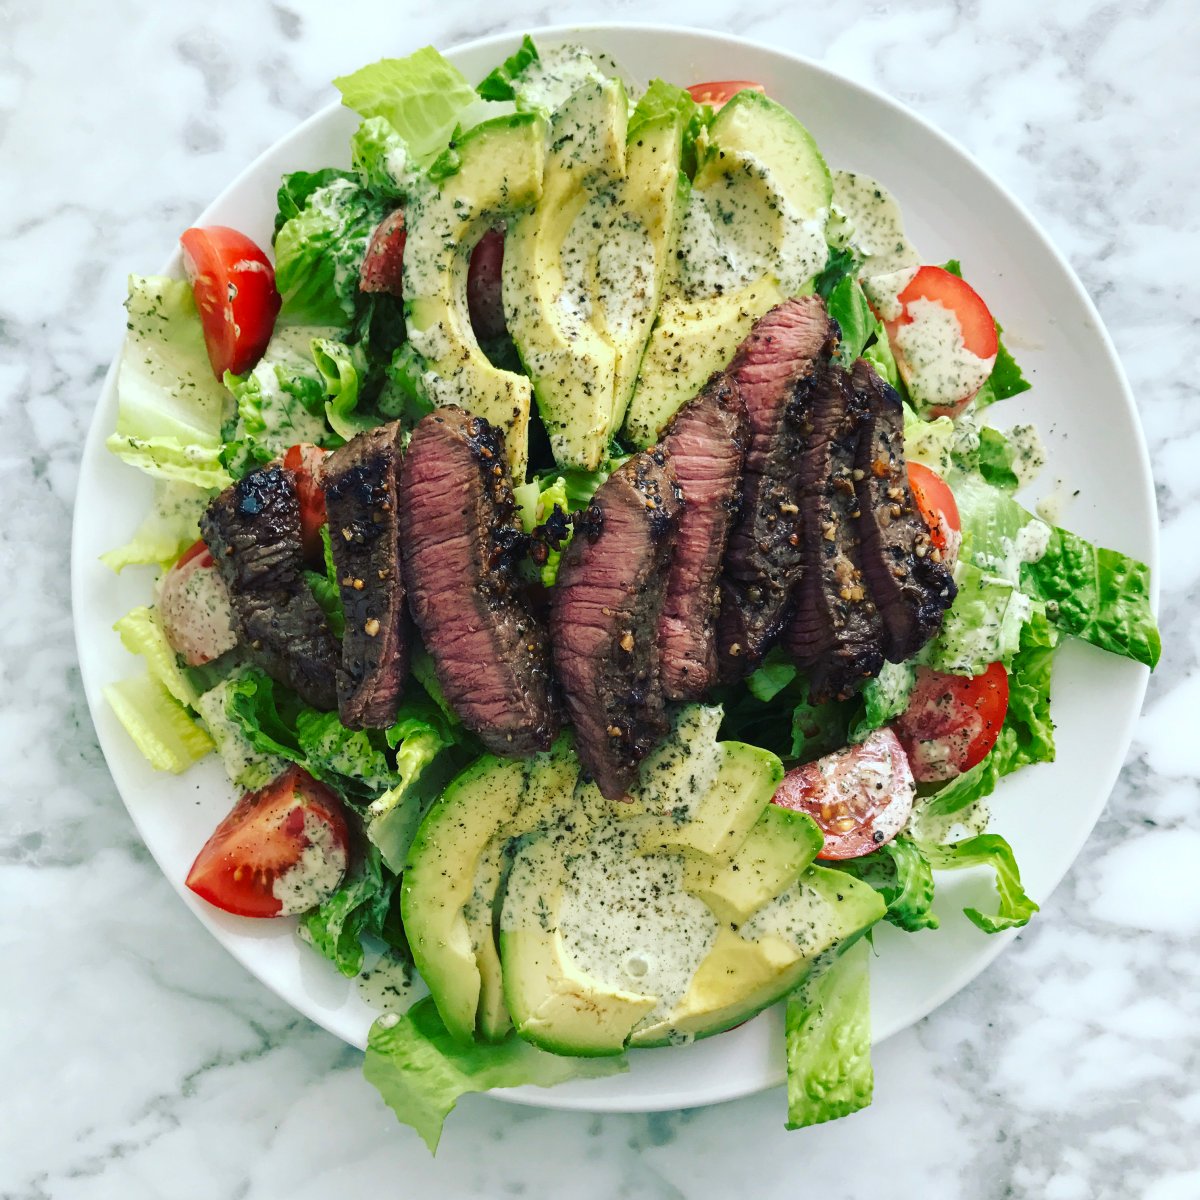 A bed of romaine lettuce with tomatoes, avocado and seared steak: one of Erin Stewart's clean meals. 